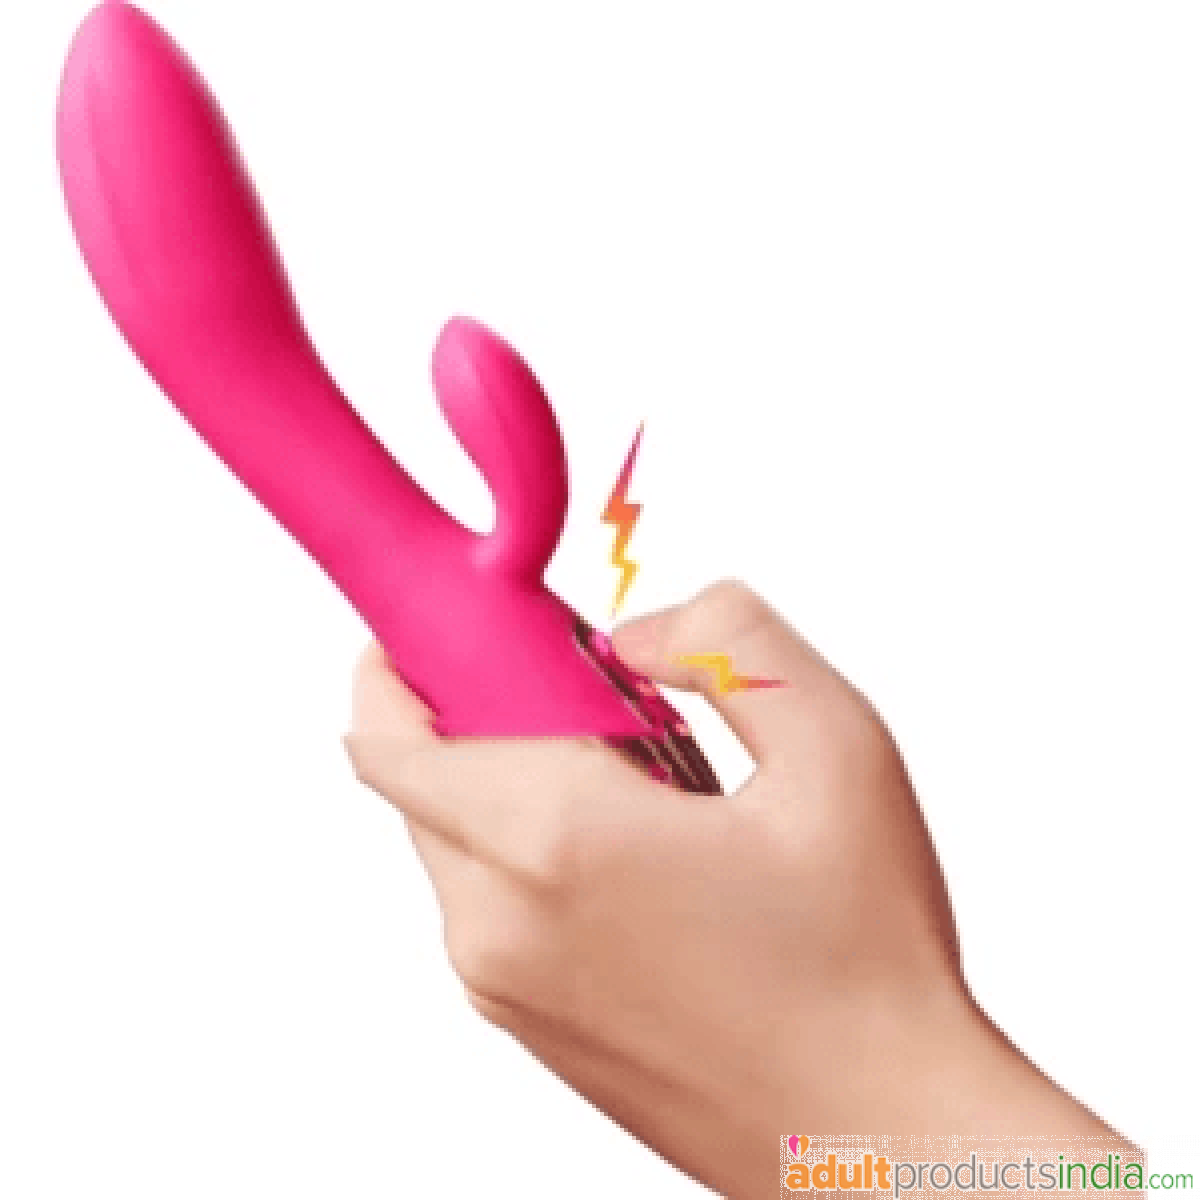 45°C DIGIHEATNC 12 Functions Silicon Rechargeable Vibrator - Pink